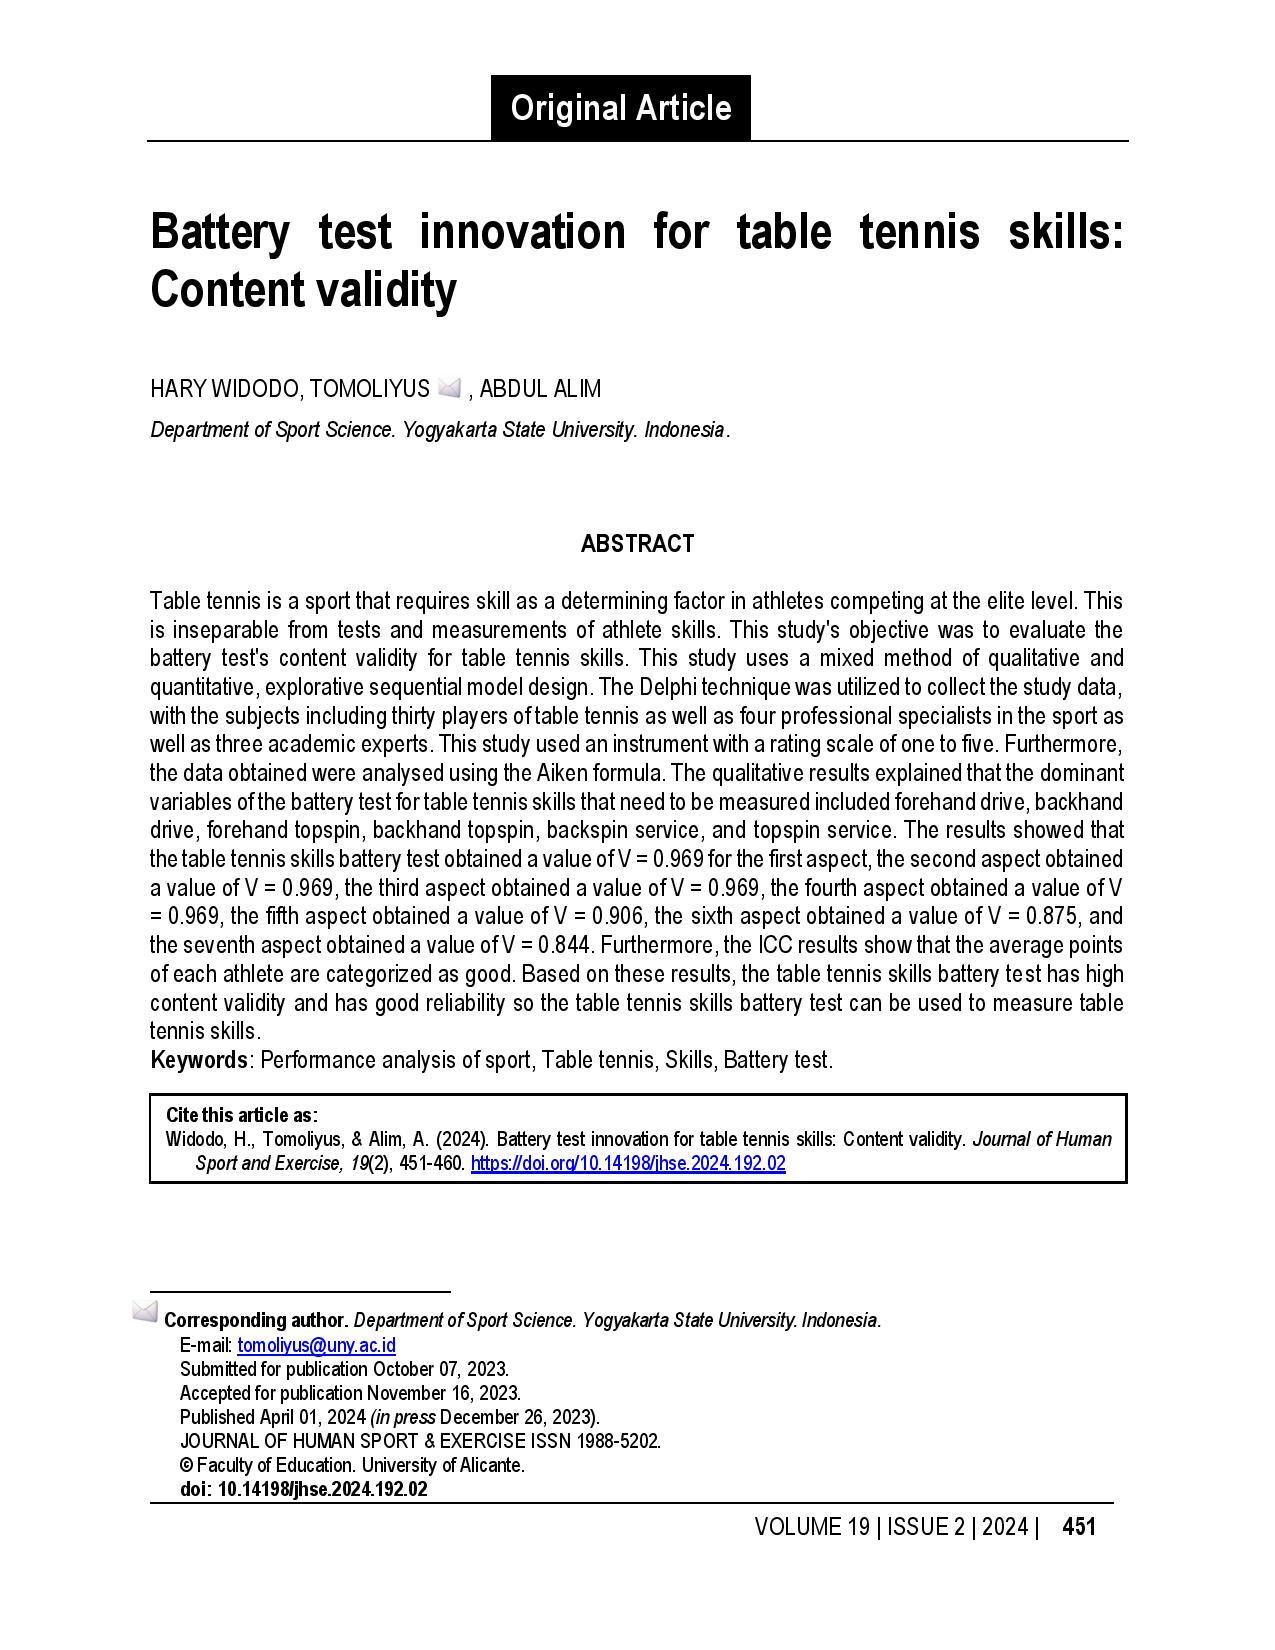 Battery test innovation for table tennis skills: Content validity